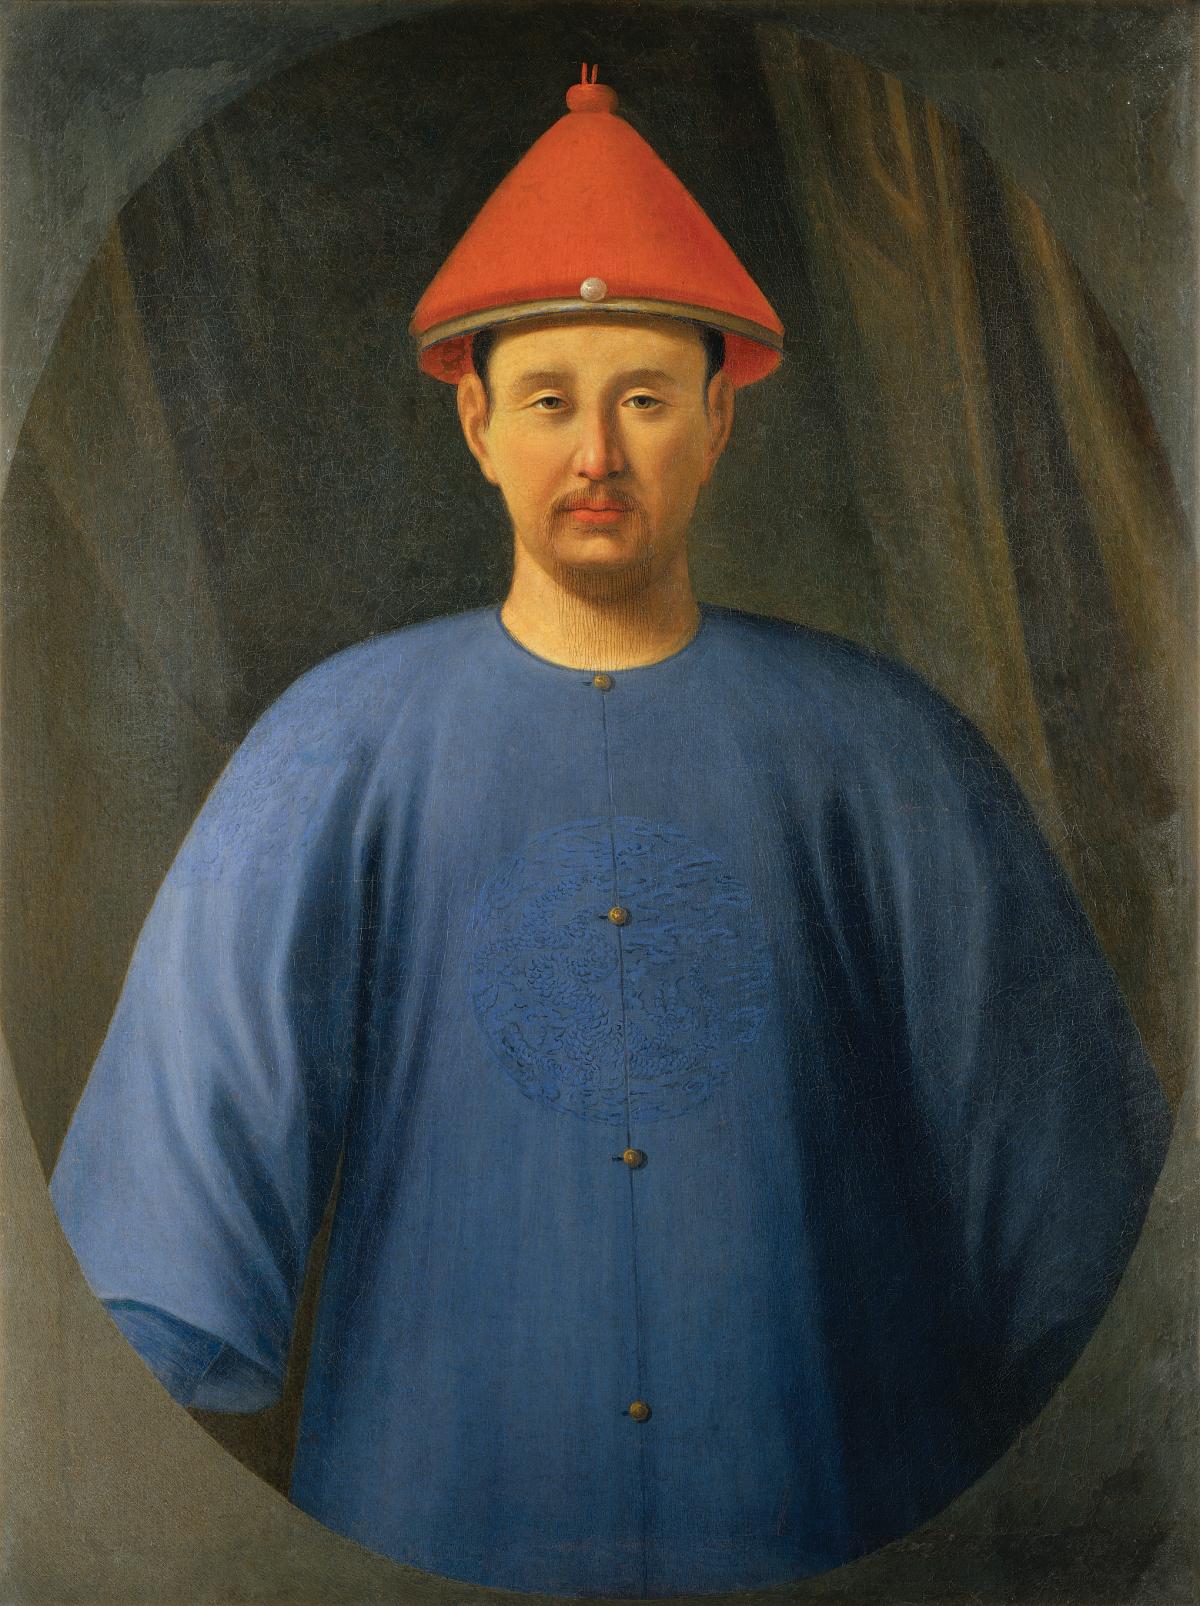 Emperor, clean shaven, wearing a conical red hat and plain blue smock